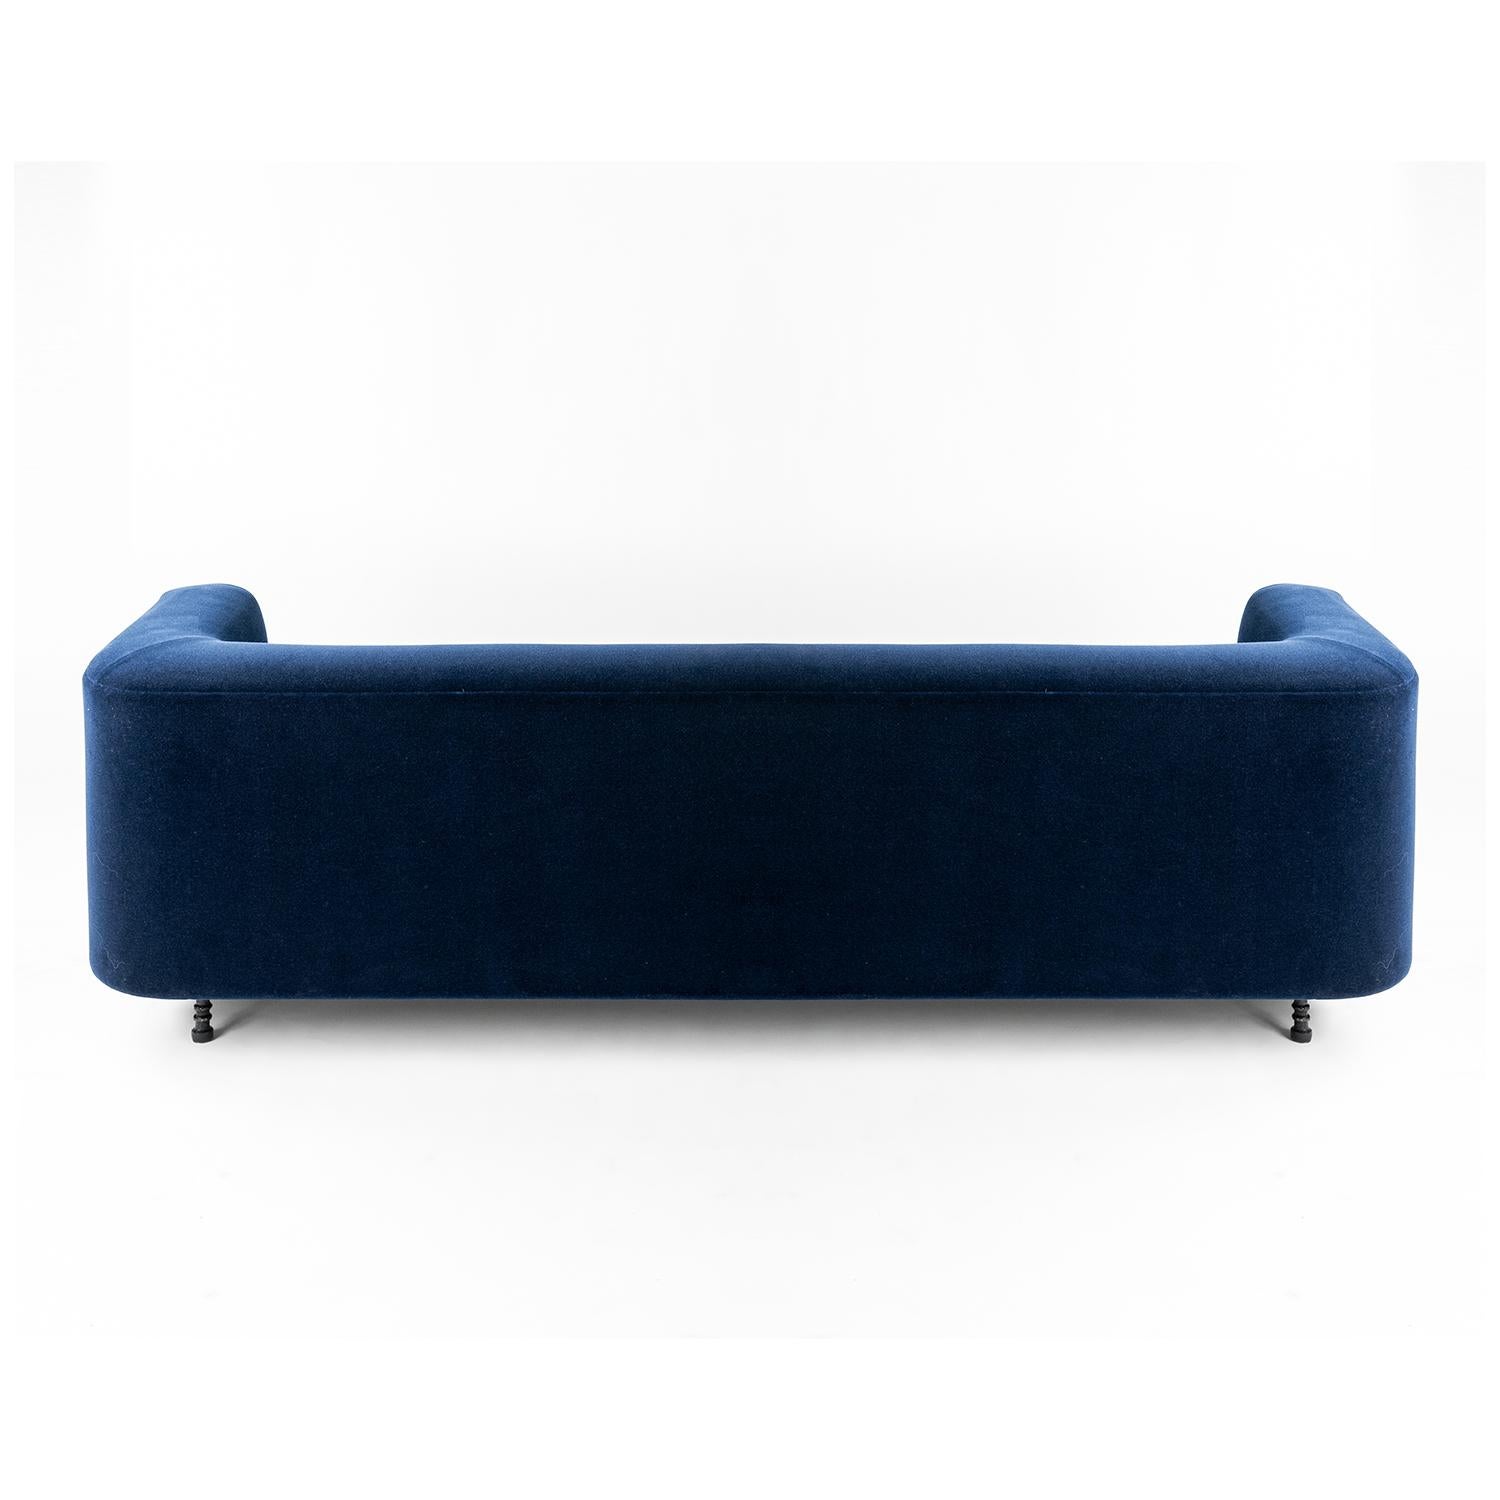 Modern Sofa in Knoll Textile Plush Mohair with Simple Hand Carved Steel Elements